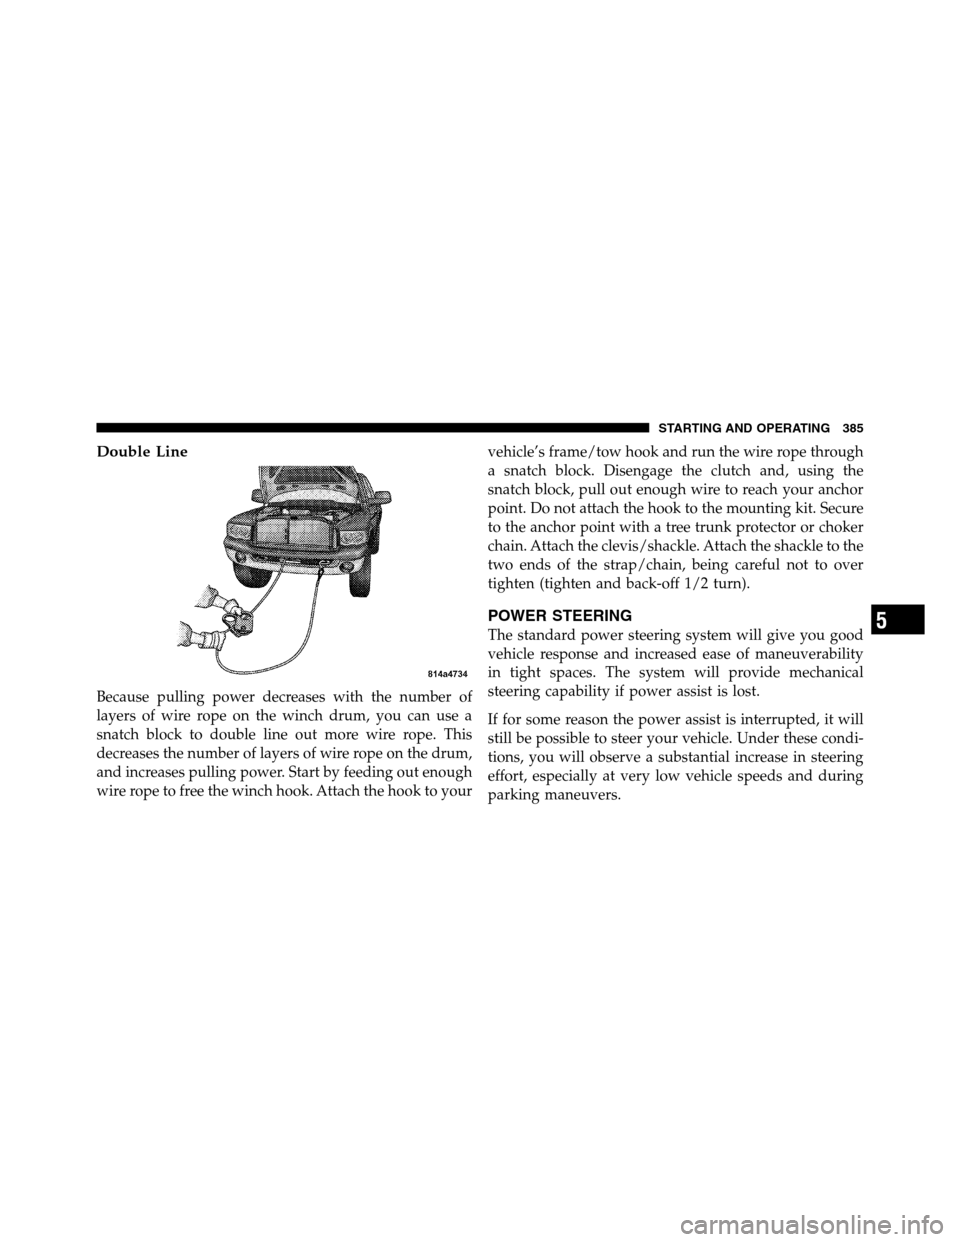 Ram 2500 2011  Owners Manual Double Line
Because pulling power decreases with the number of
layers of wire rope on the winch drum, you can use a
snatch block to double line out more wire rope. This
decreases the number of layers 